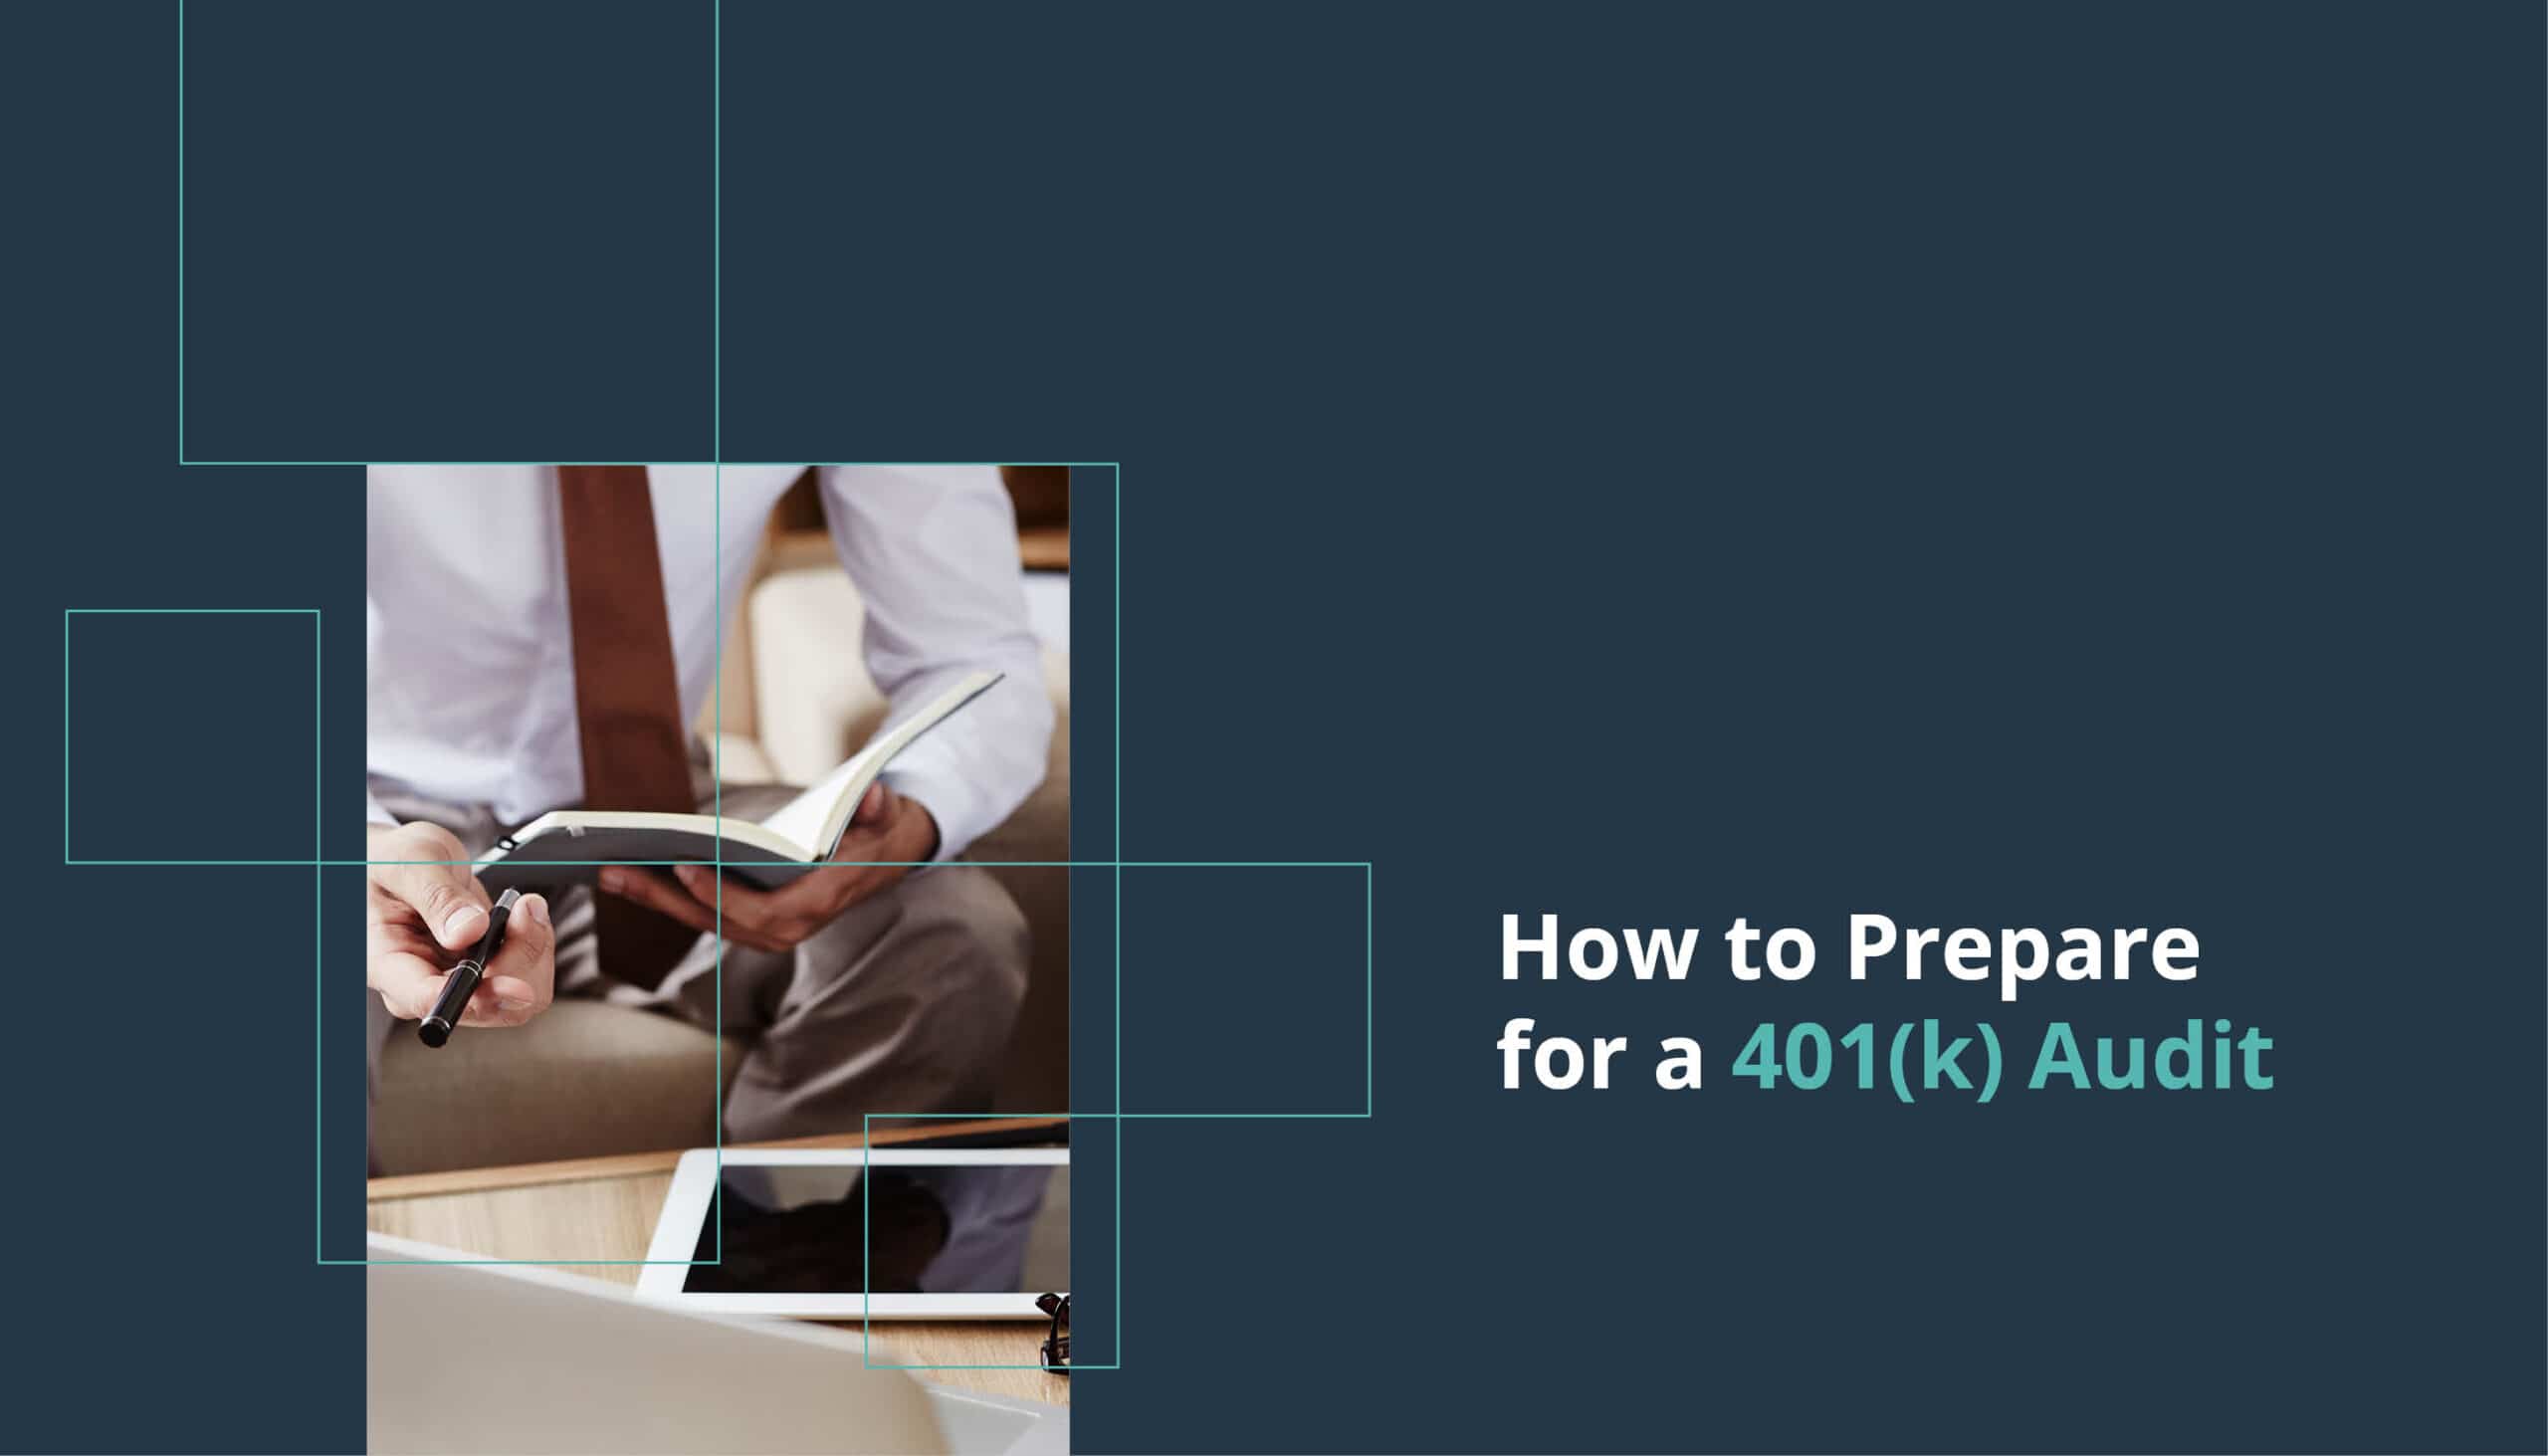 How to Prepare for a 401(k) Audit